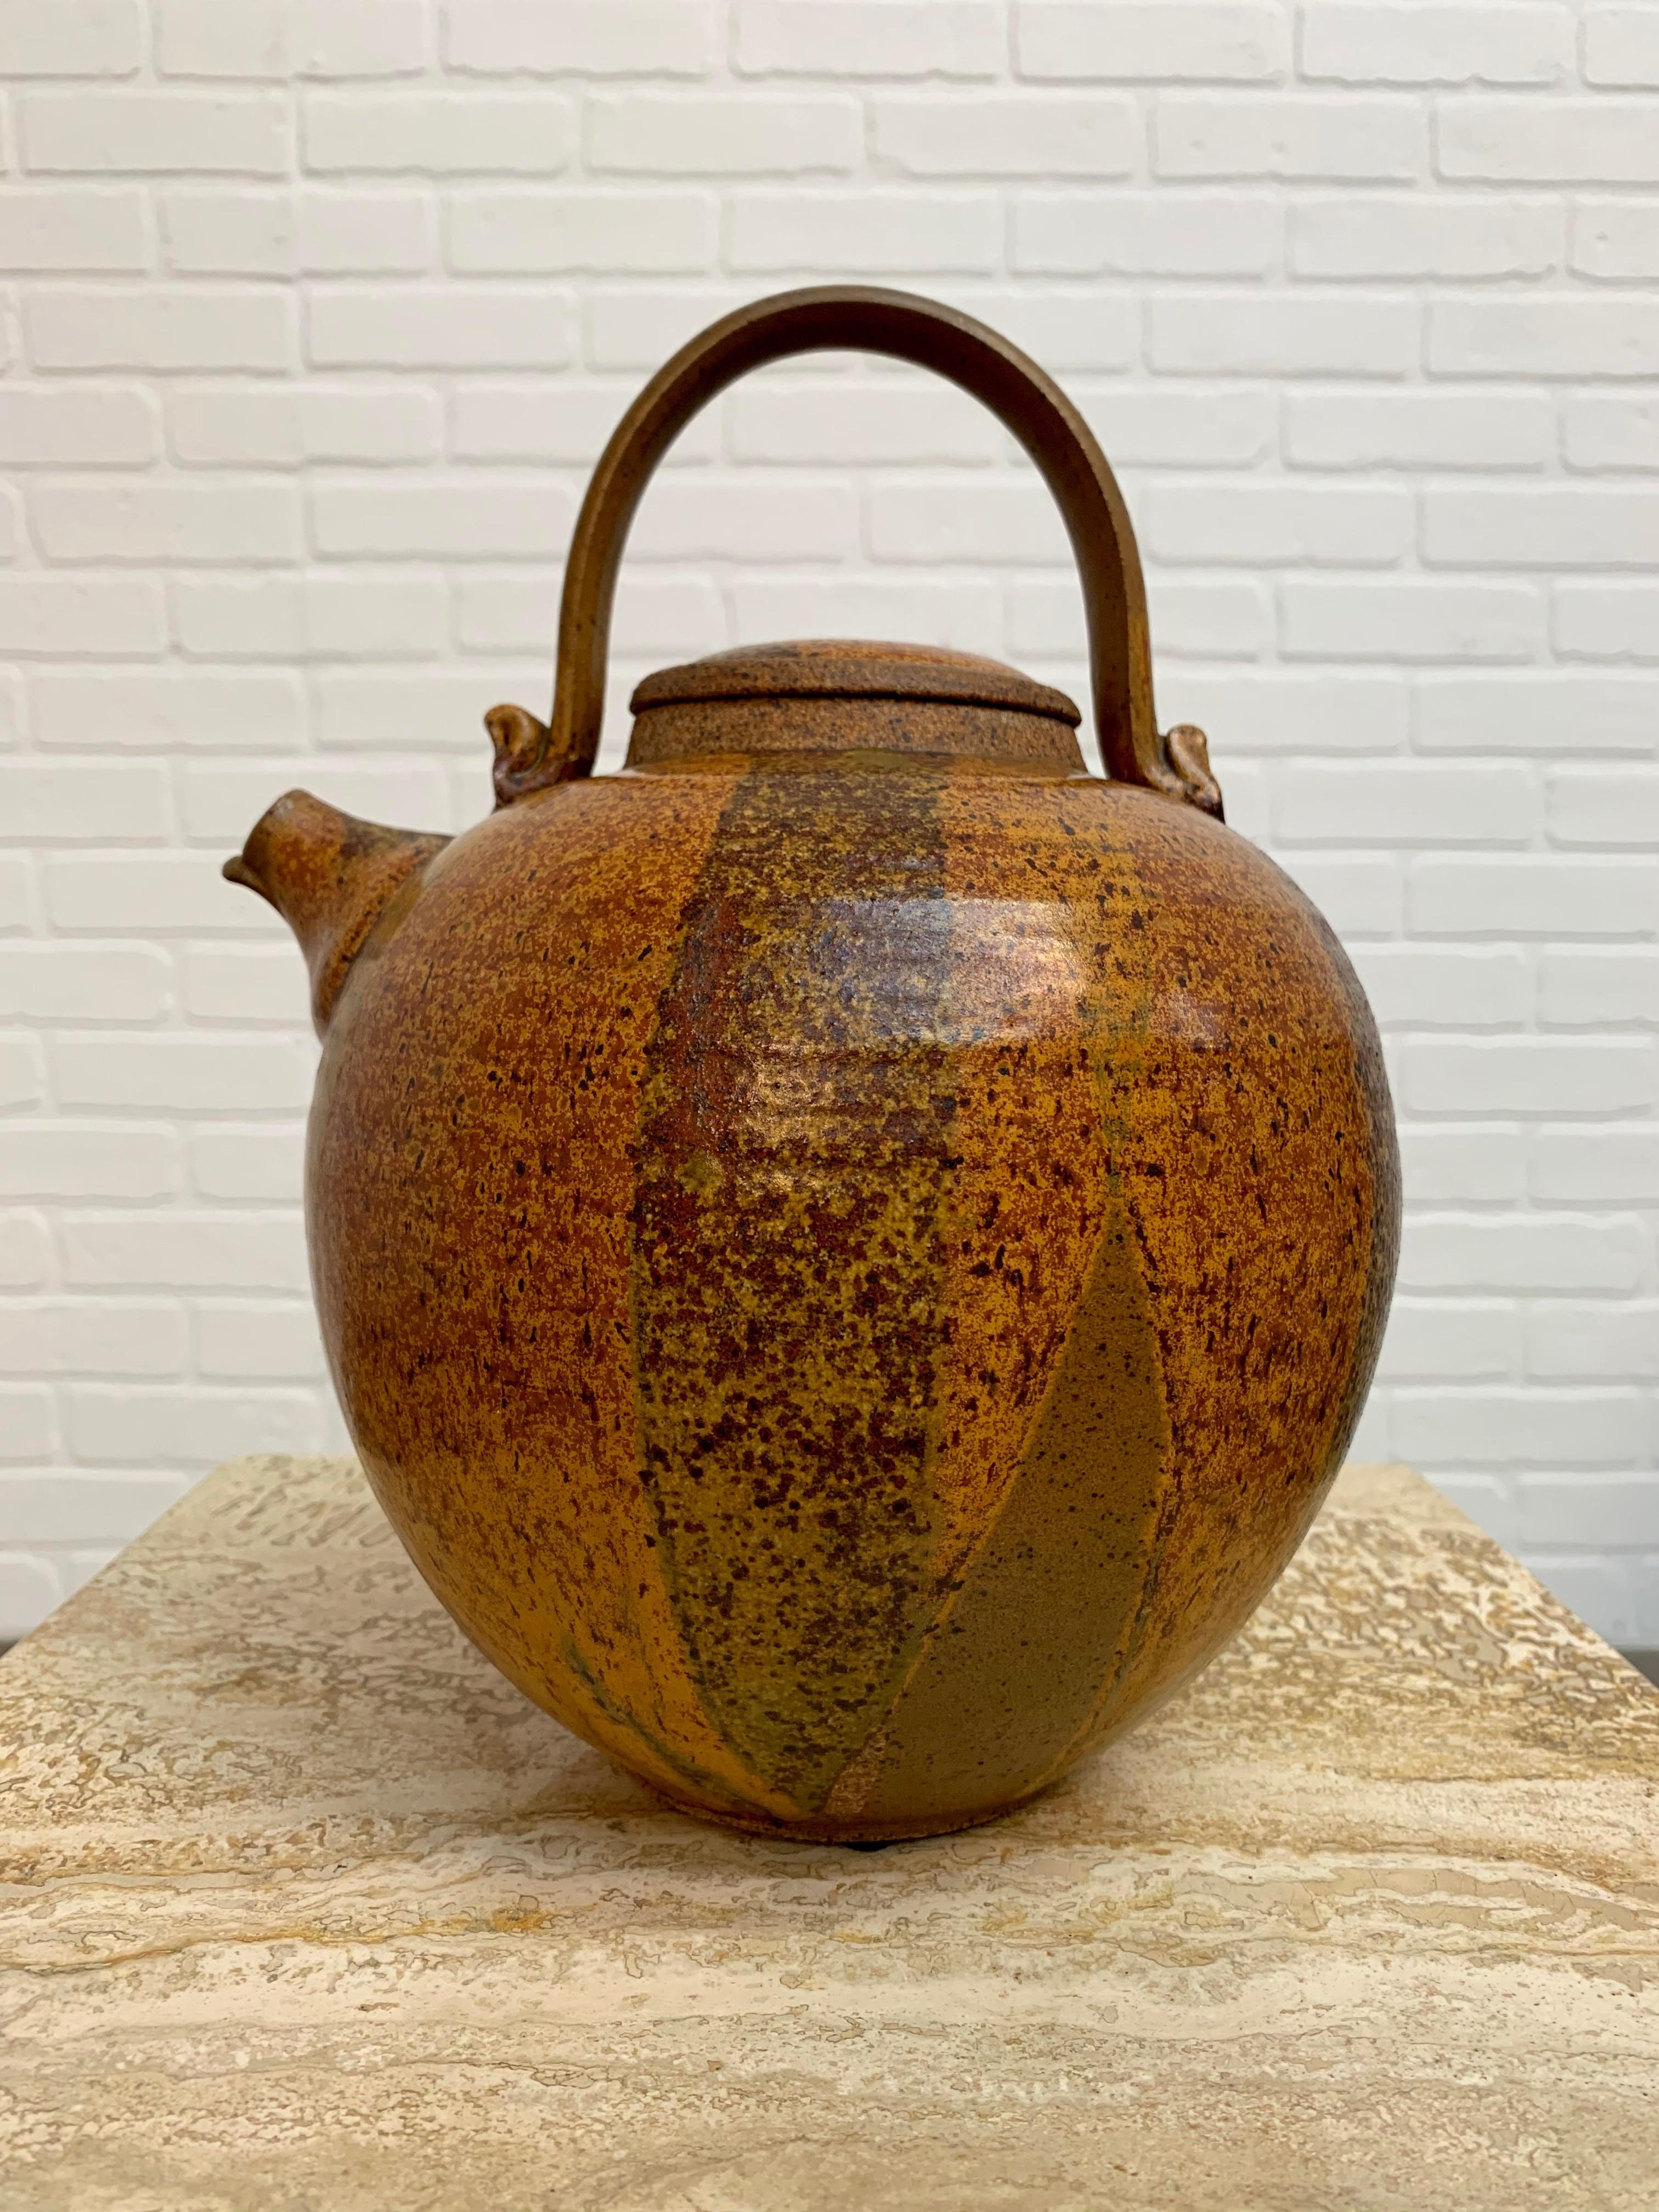 California art pottery watering vessel with lid.